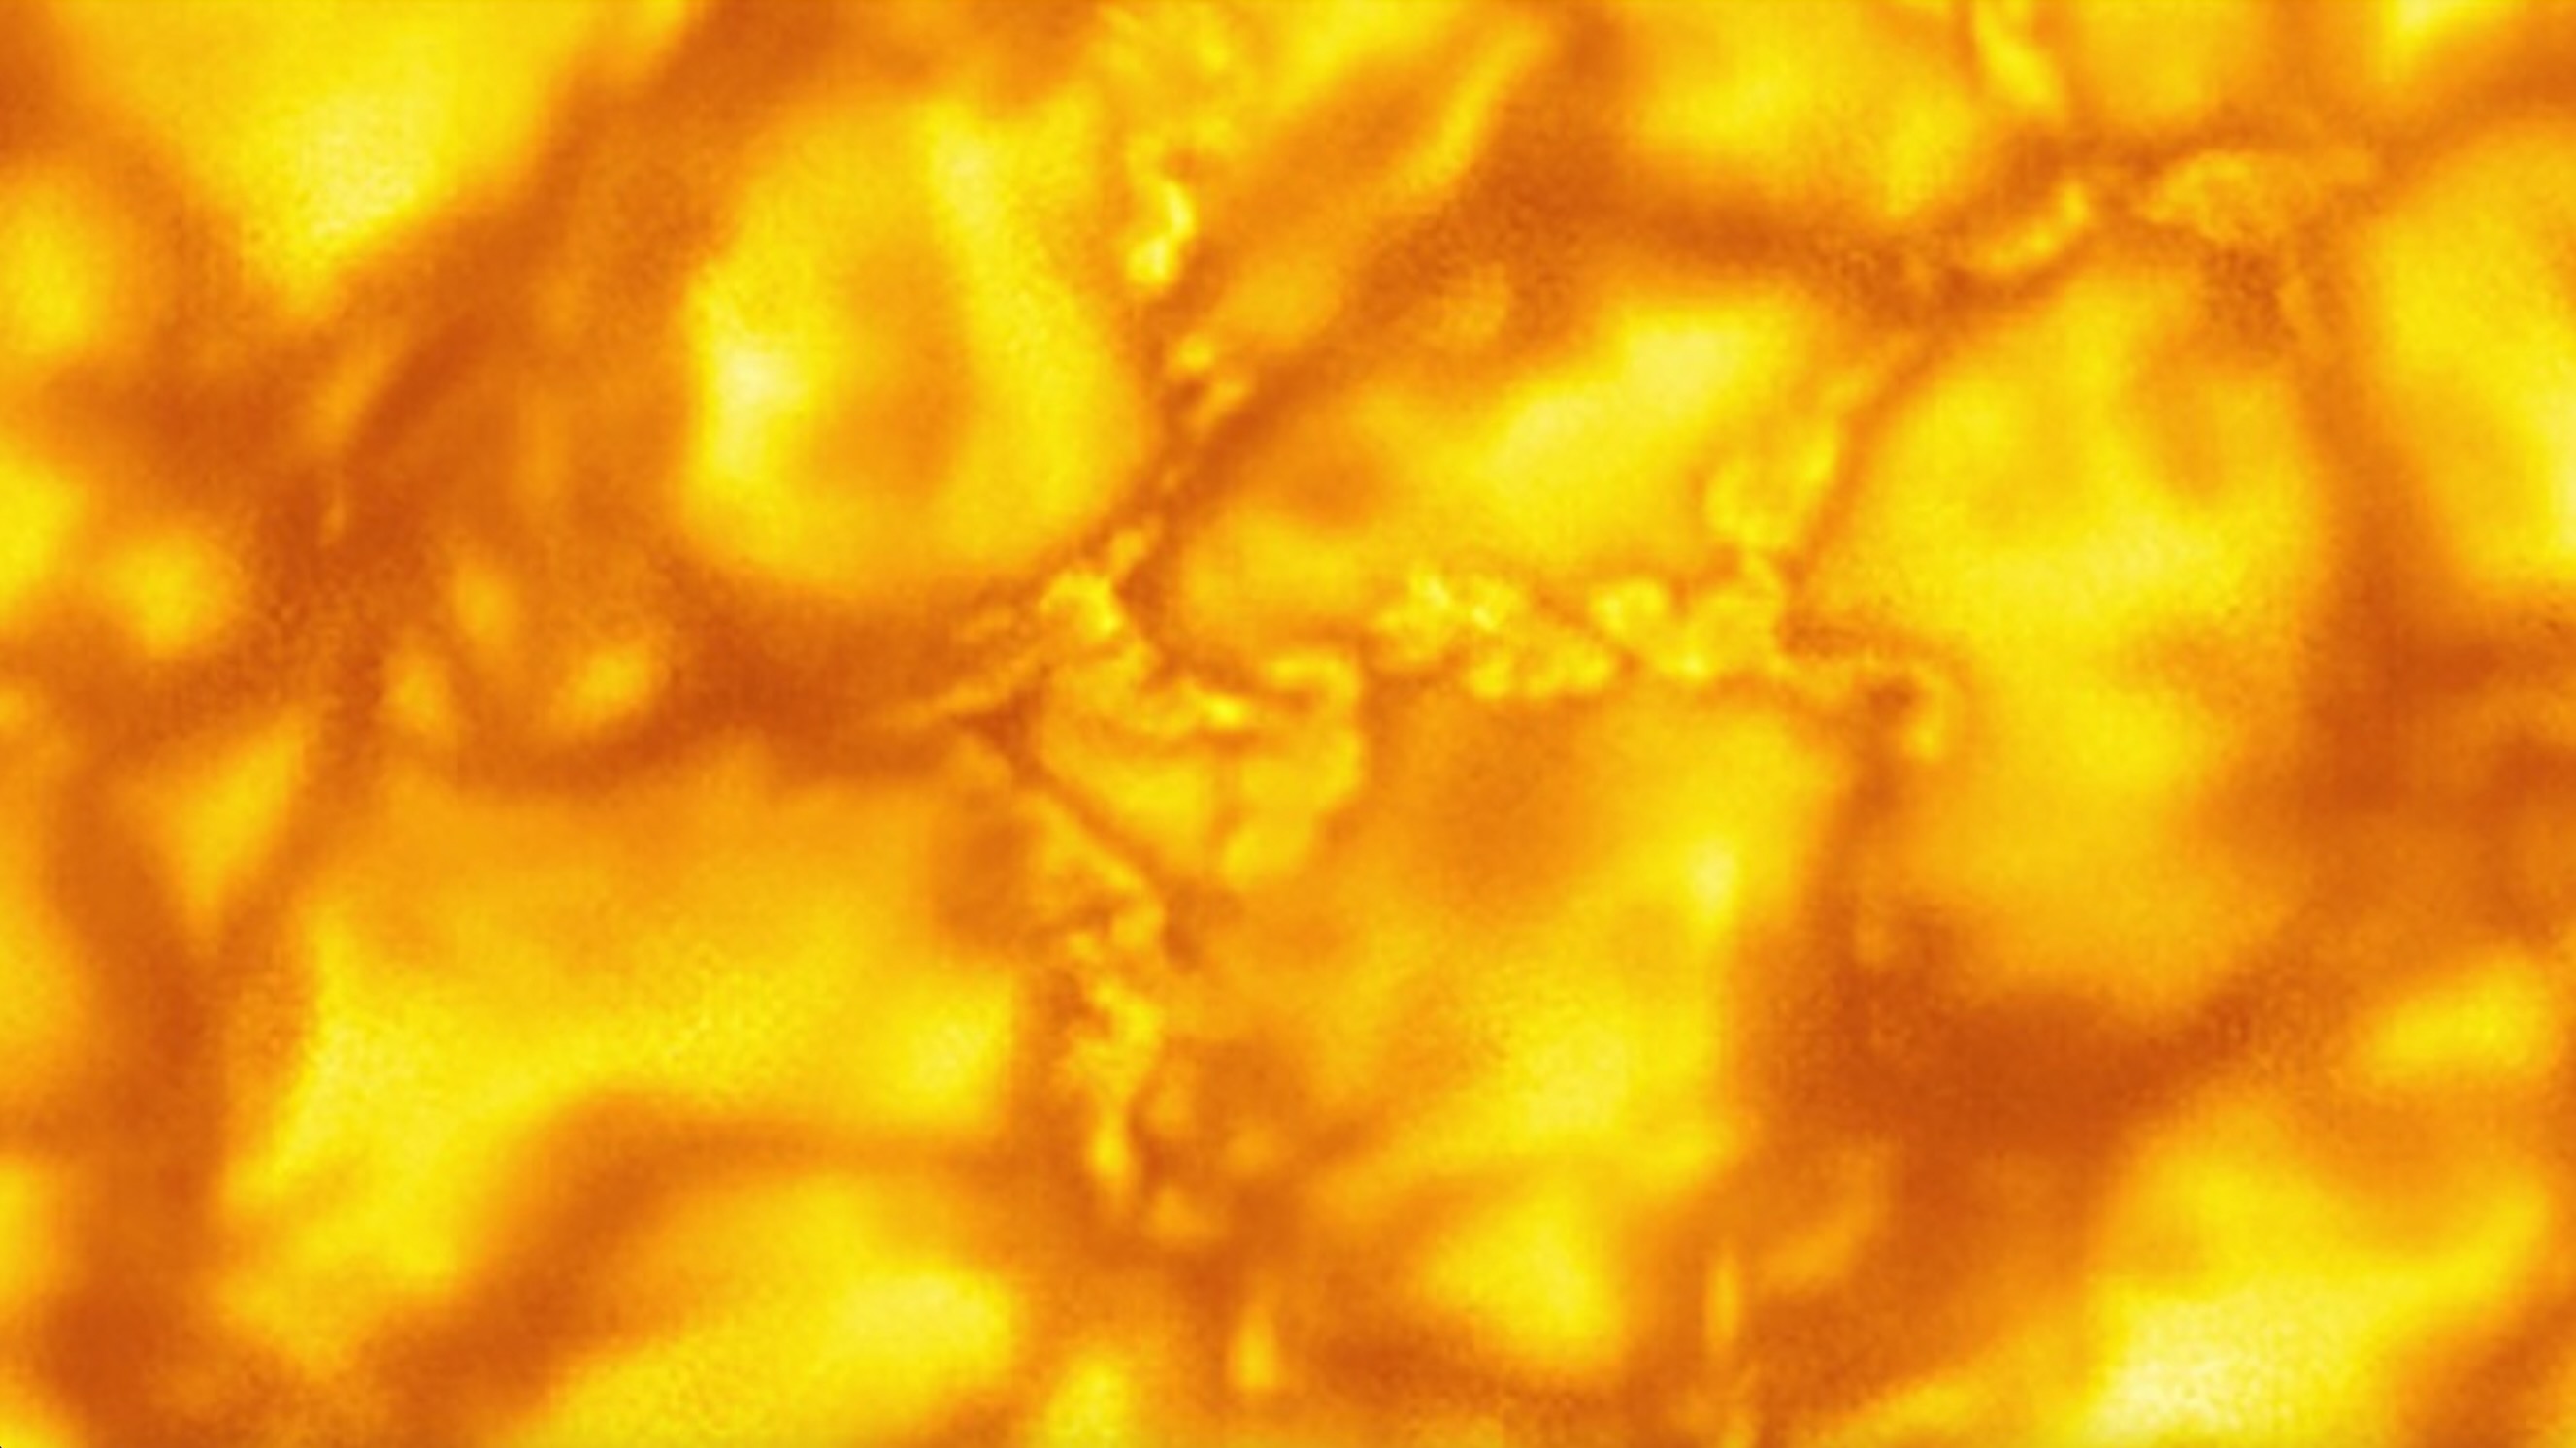 The fine structure of the sun, showing orange-yellow convective bubbles.